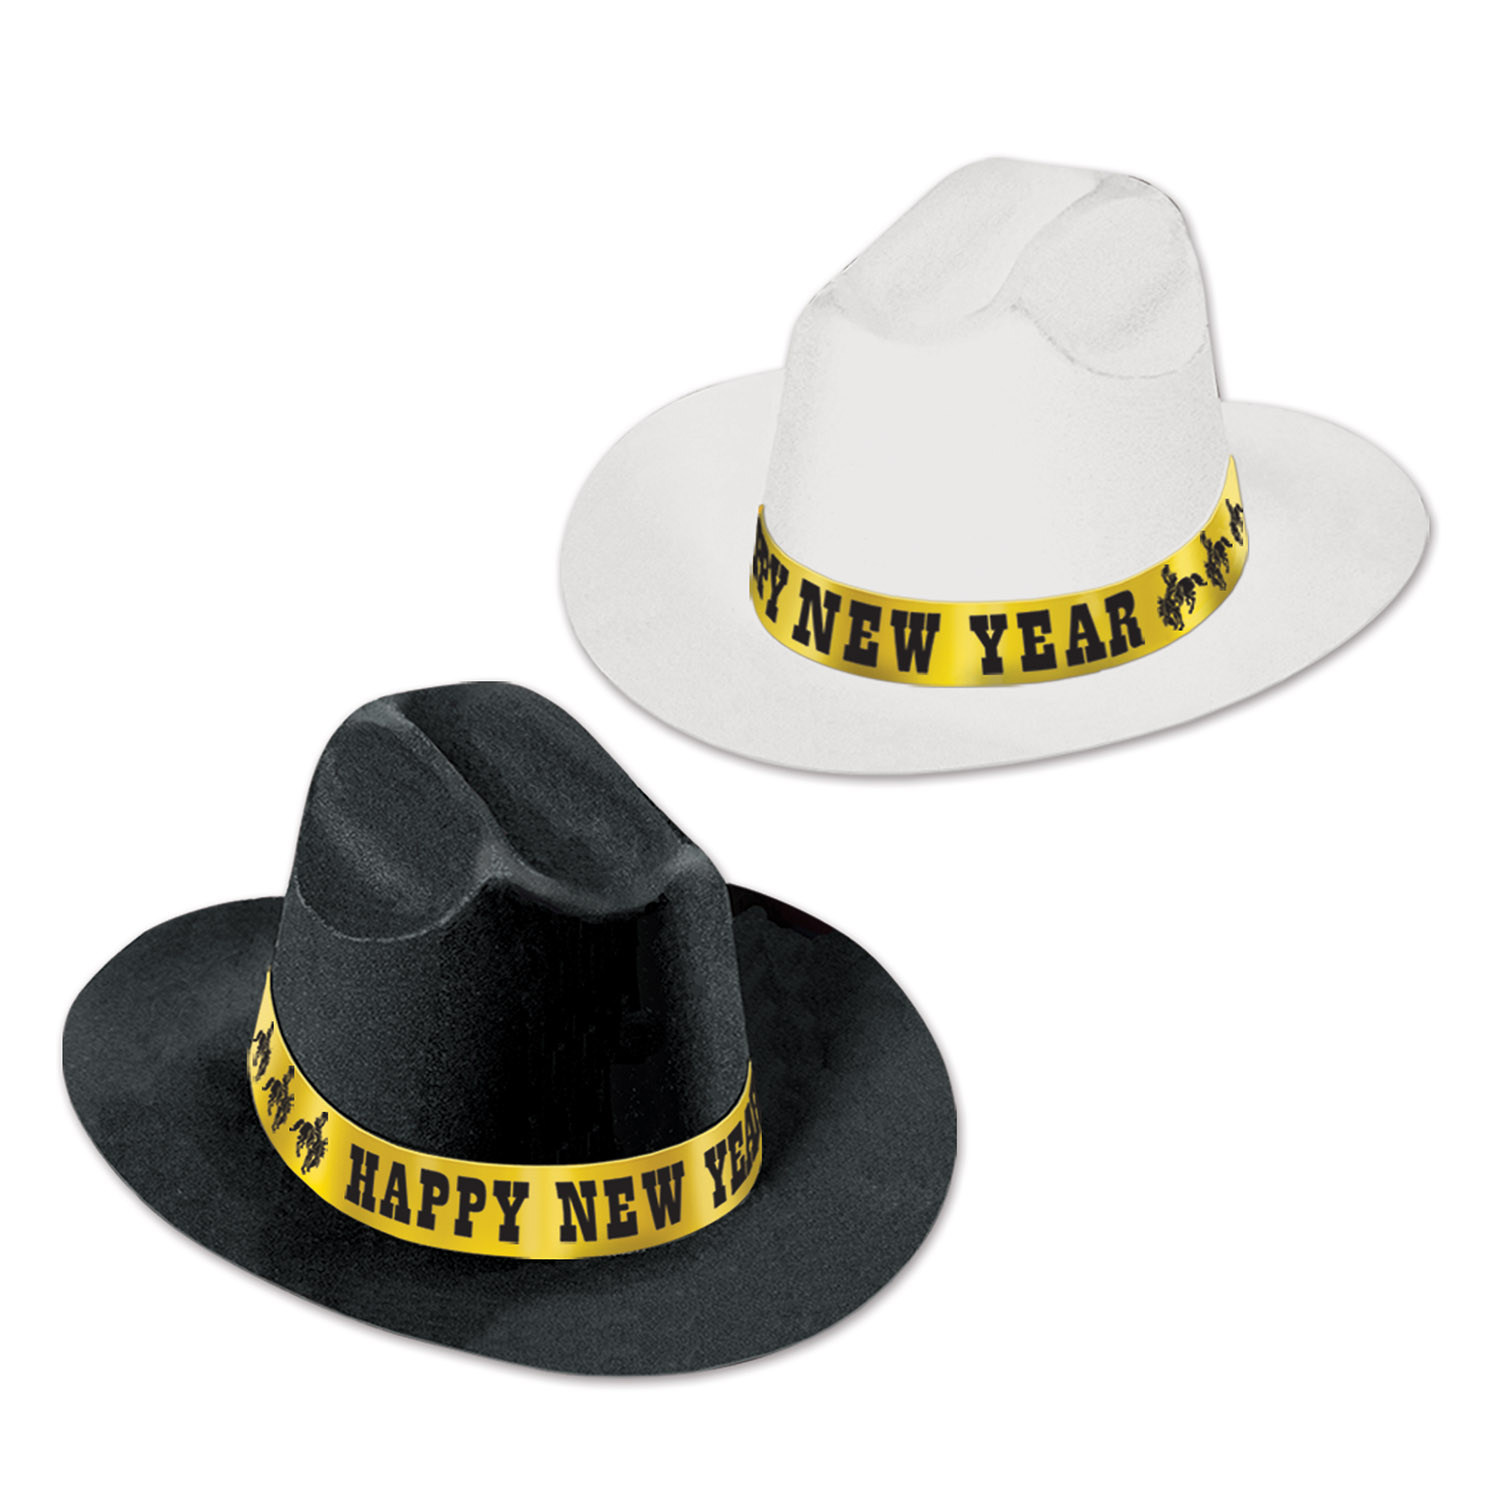 Black and white cowboy party hats with a gold happy new year band